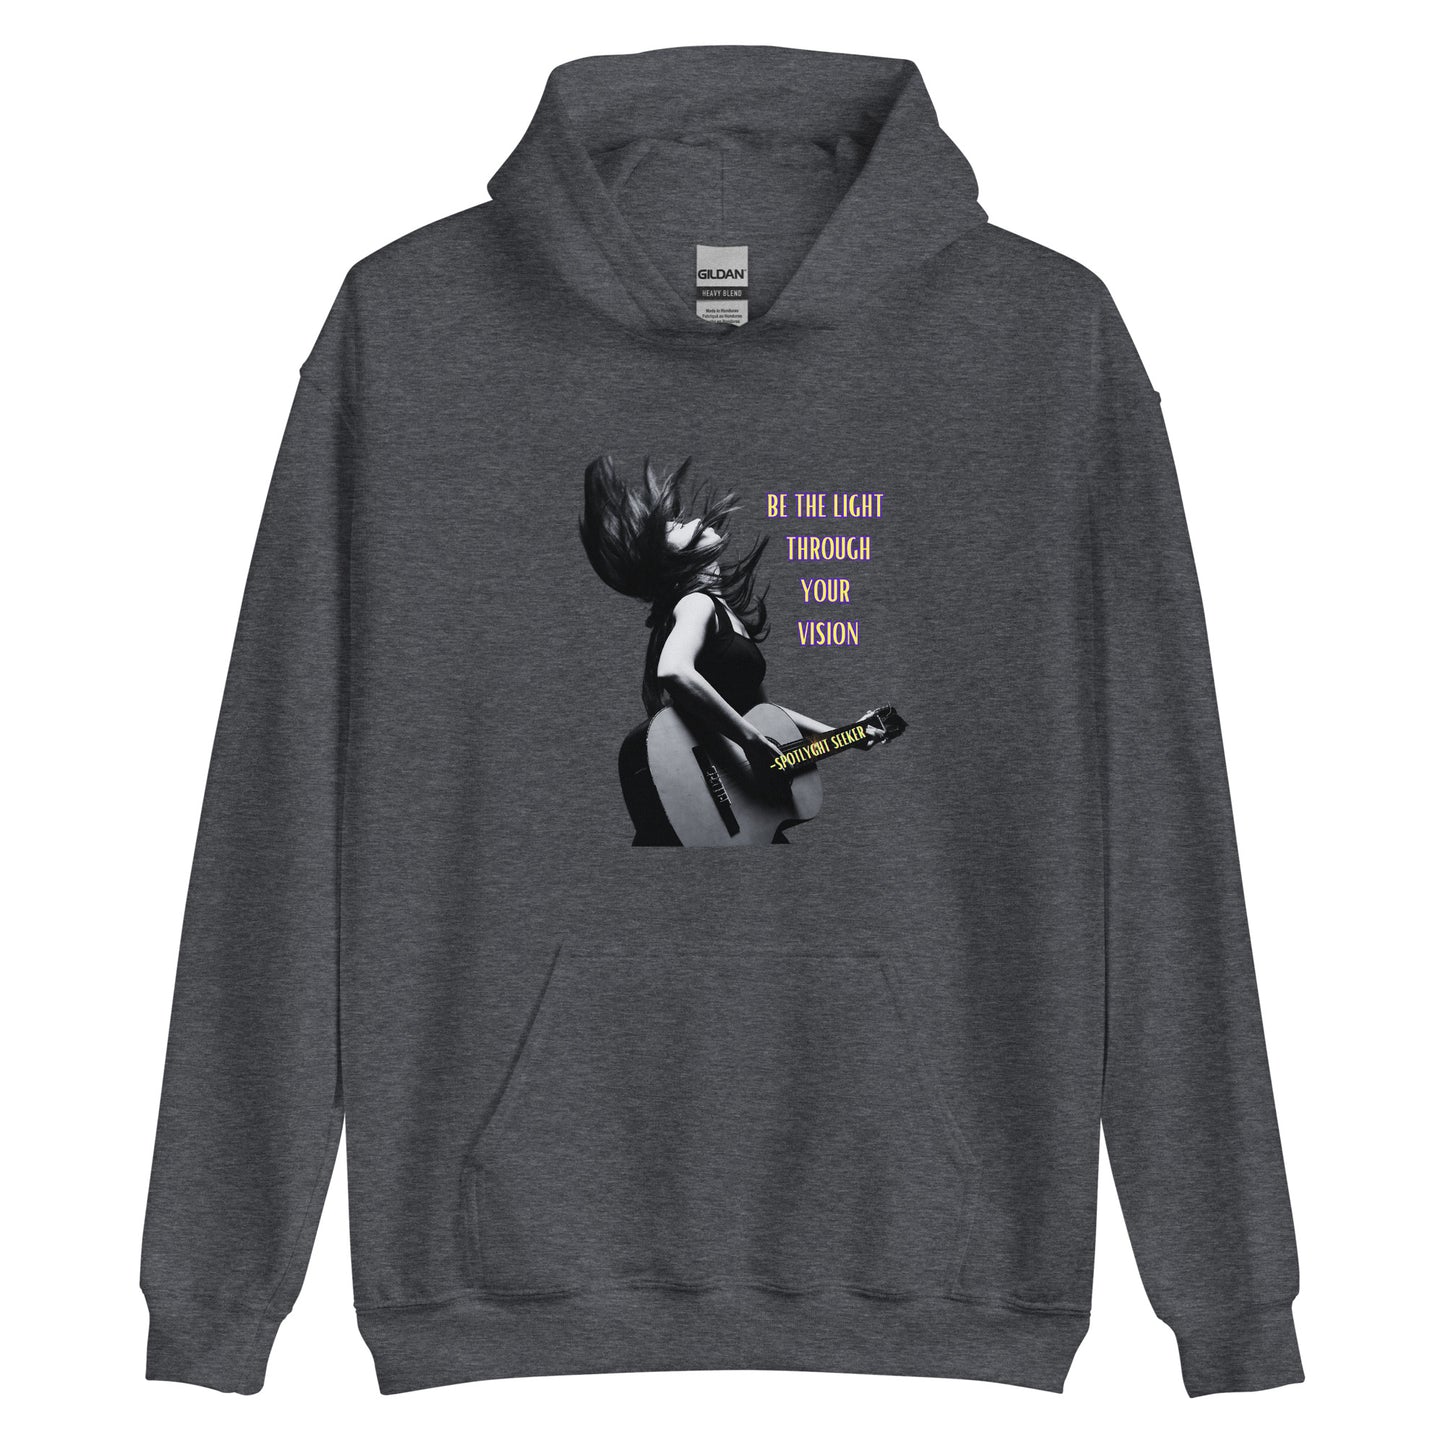 A stylish black and white Heavyweight Be the Light Unisex Hoodie displayed against a backdrop of creativity. The bold graphics symbolize authenticity, inviting artists to embrace their vision and be the light for their audience. - Grey Color